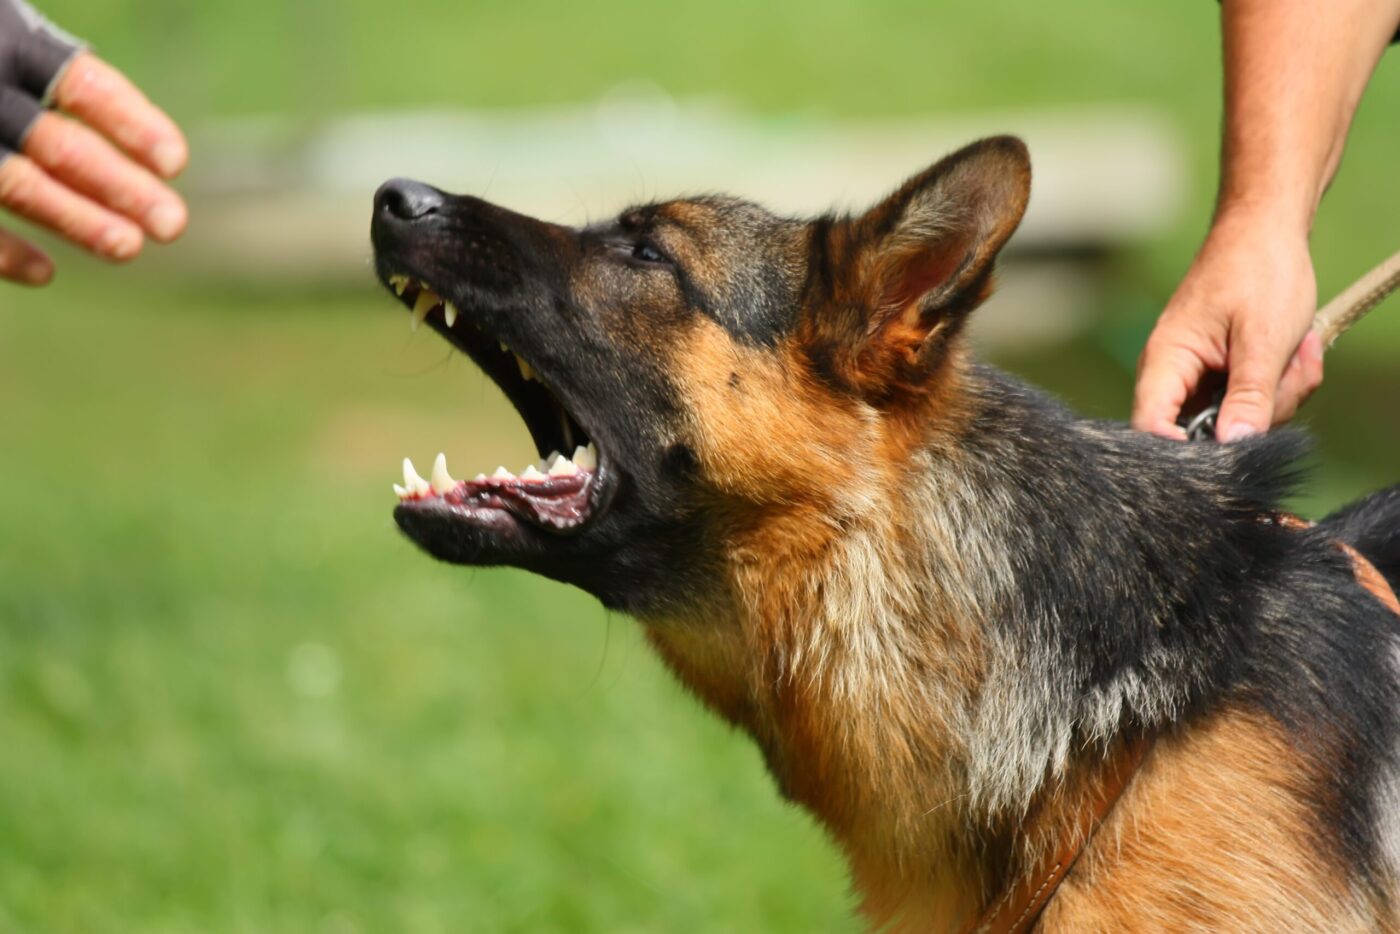 A German Shepherd is growling and baring its teeth, held back by its leash.